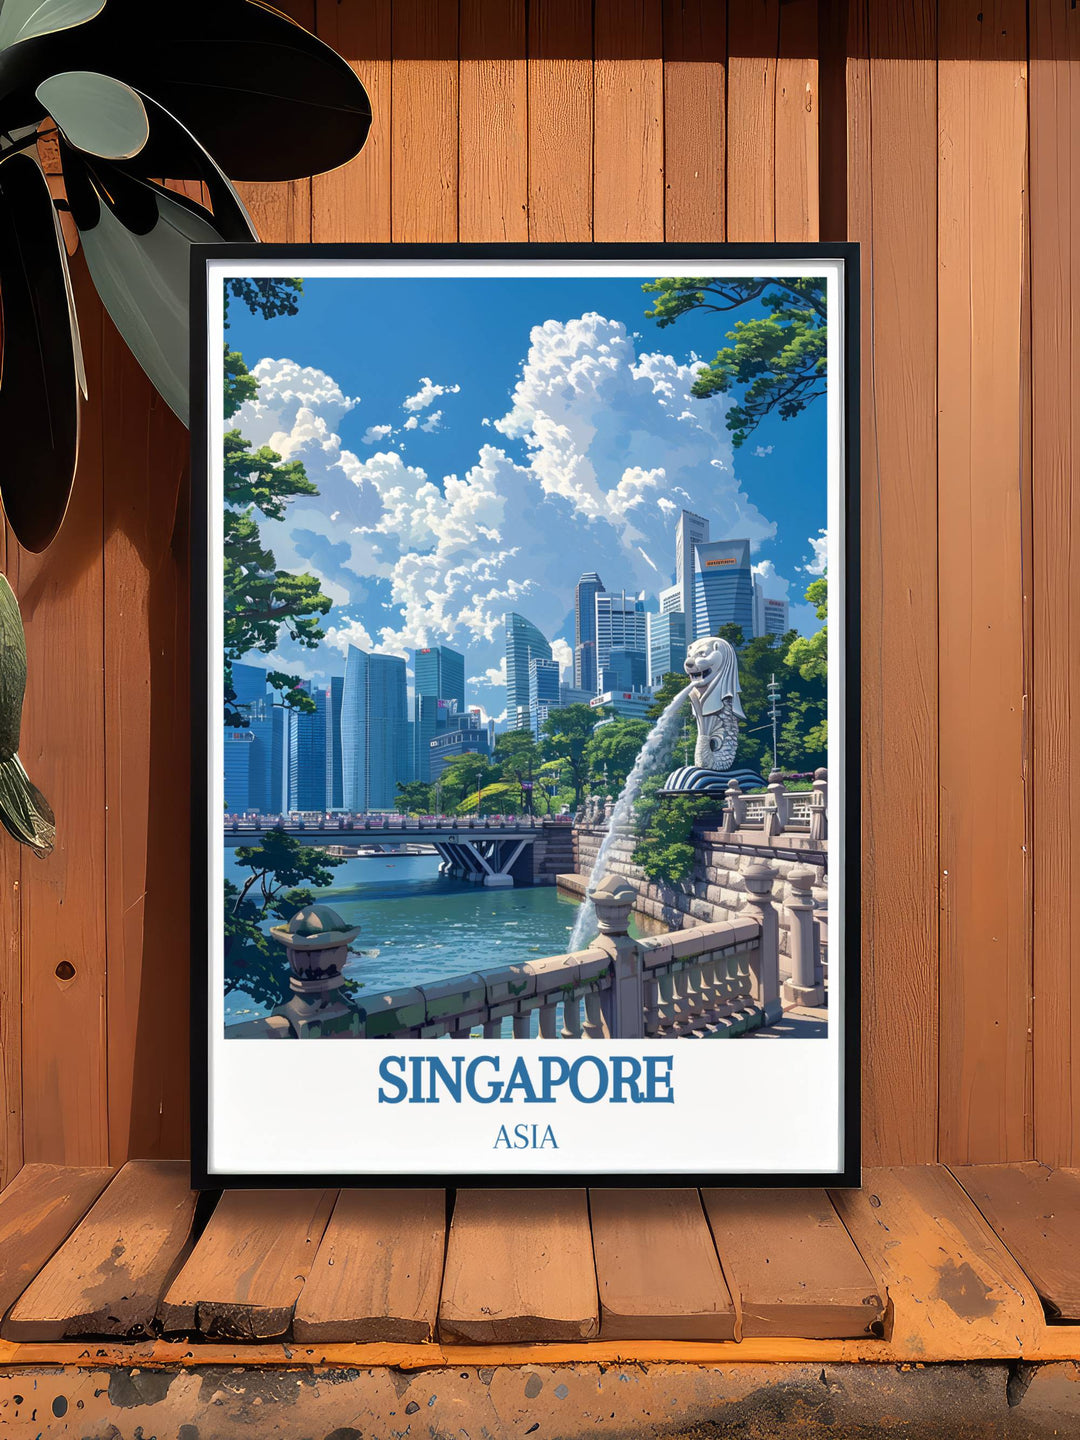 Merlion Park art prints, showcasing the harmonious blend of history and modernity in one of Singapores most famous landmarks.